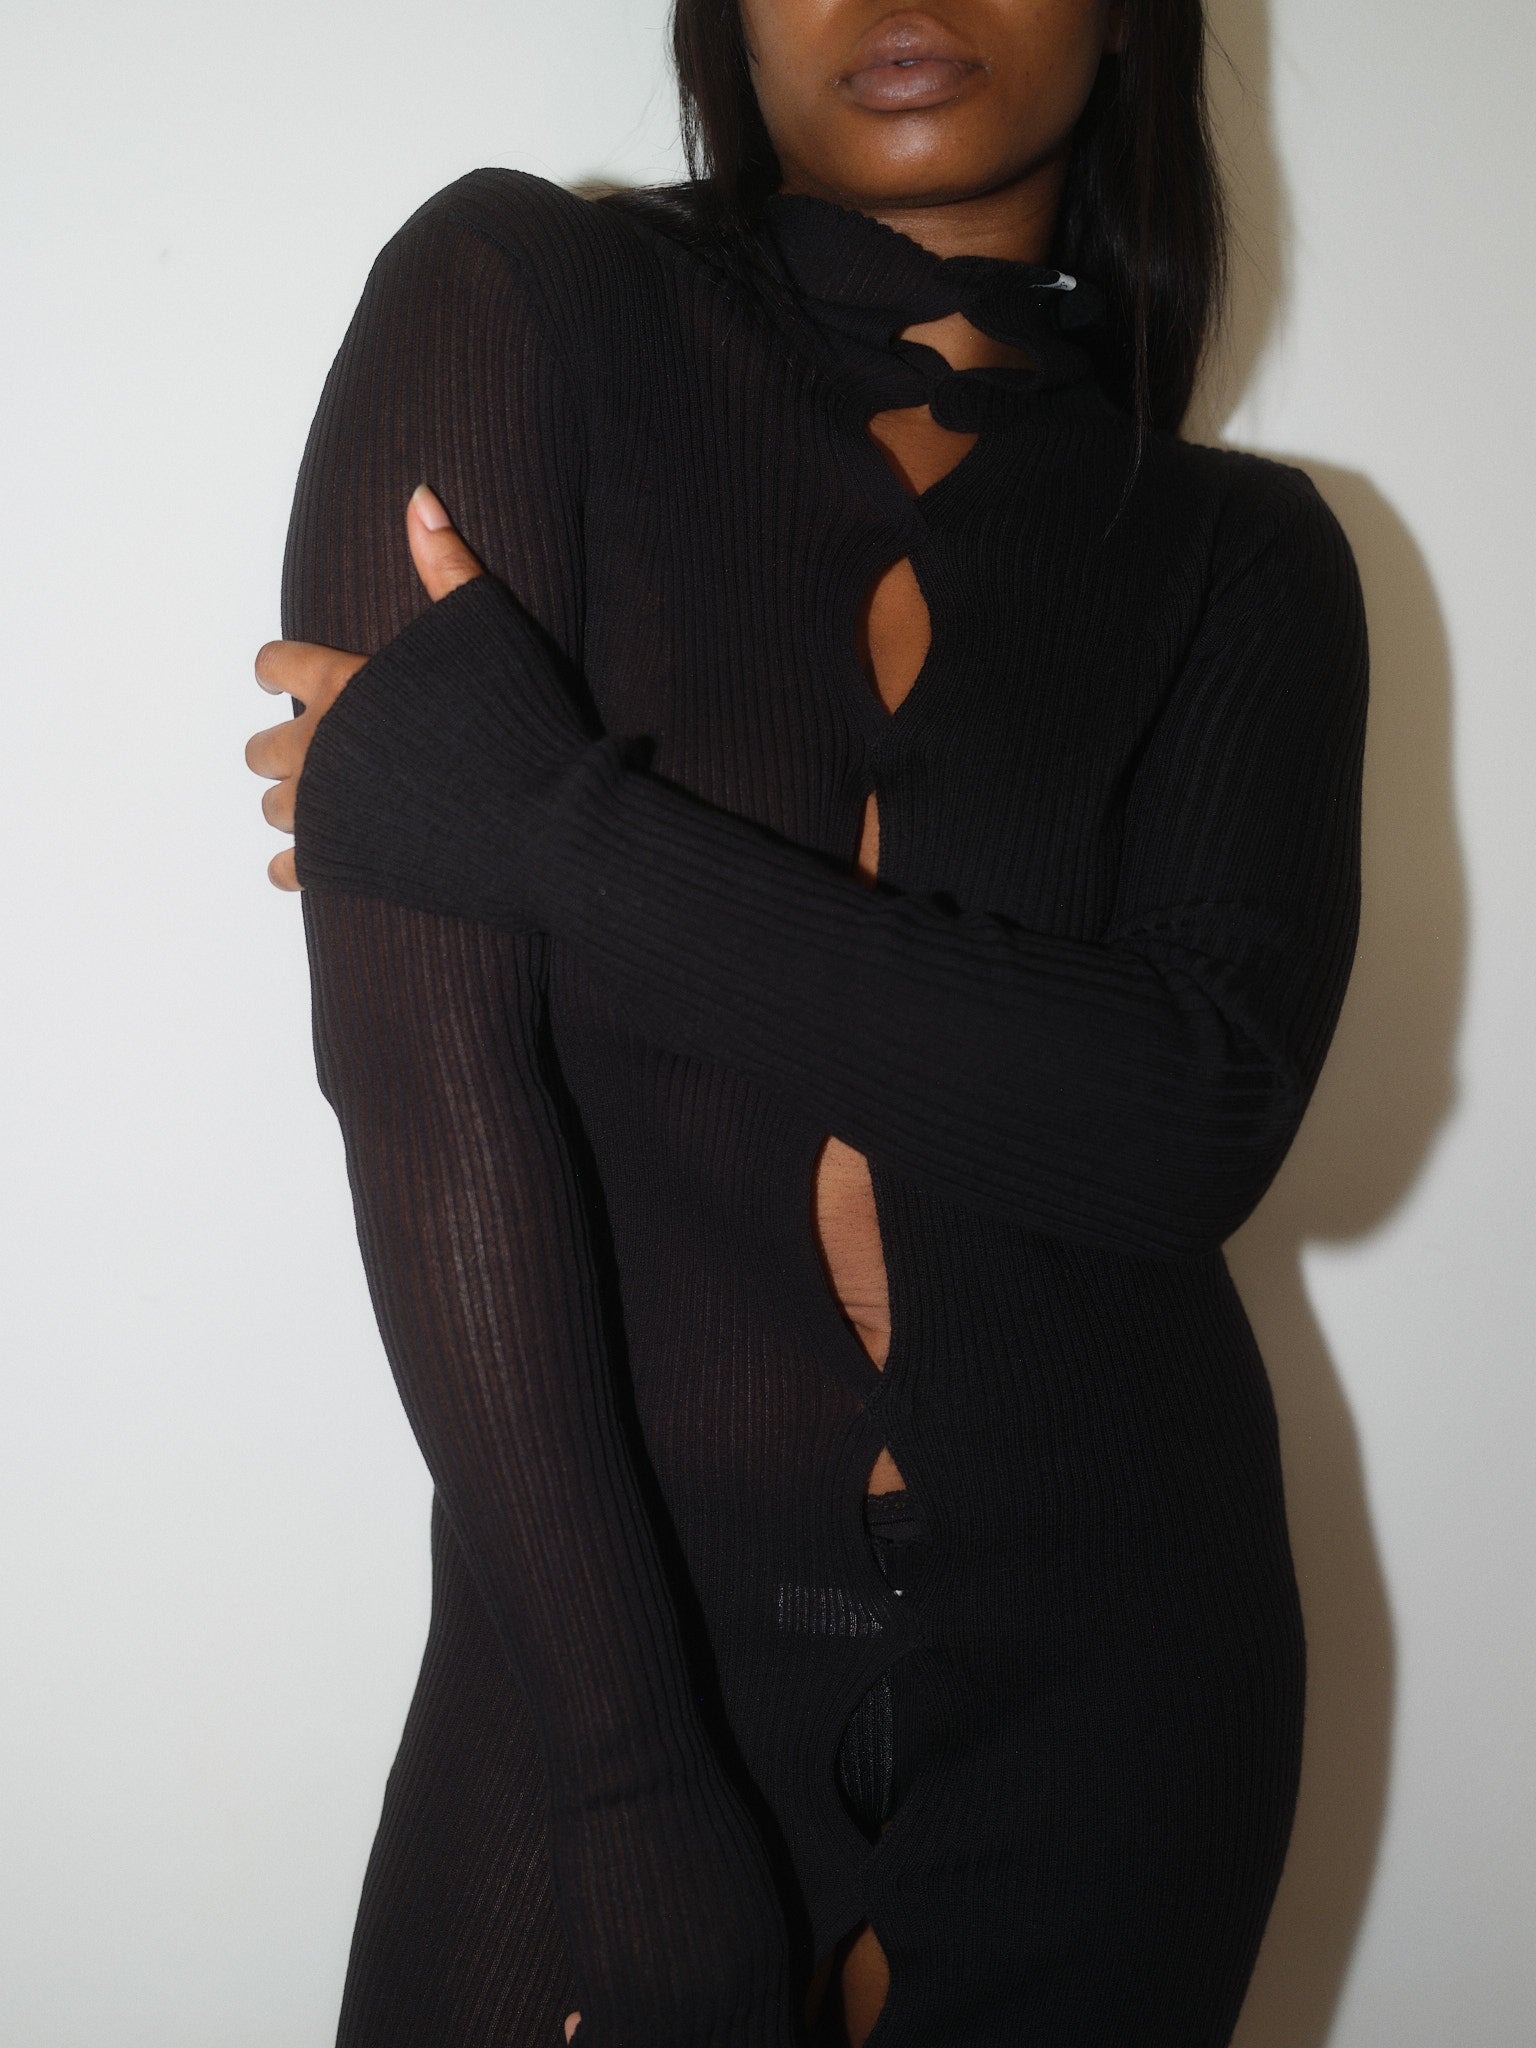 Knitted Dress designed by Christina Seewald. Sustainable, designed and made in Europe. Best Quality Yarns from Italy.